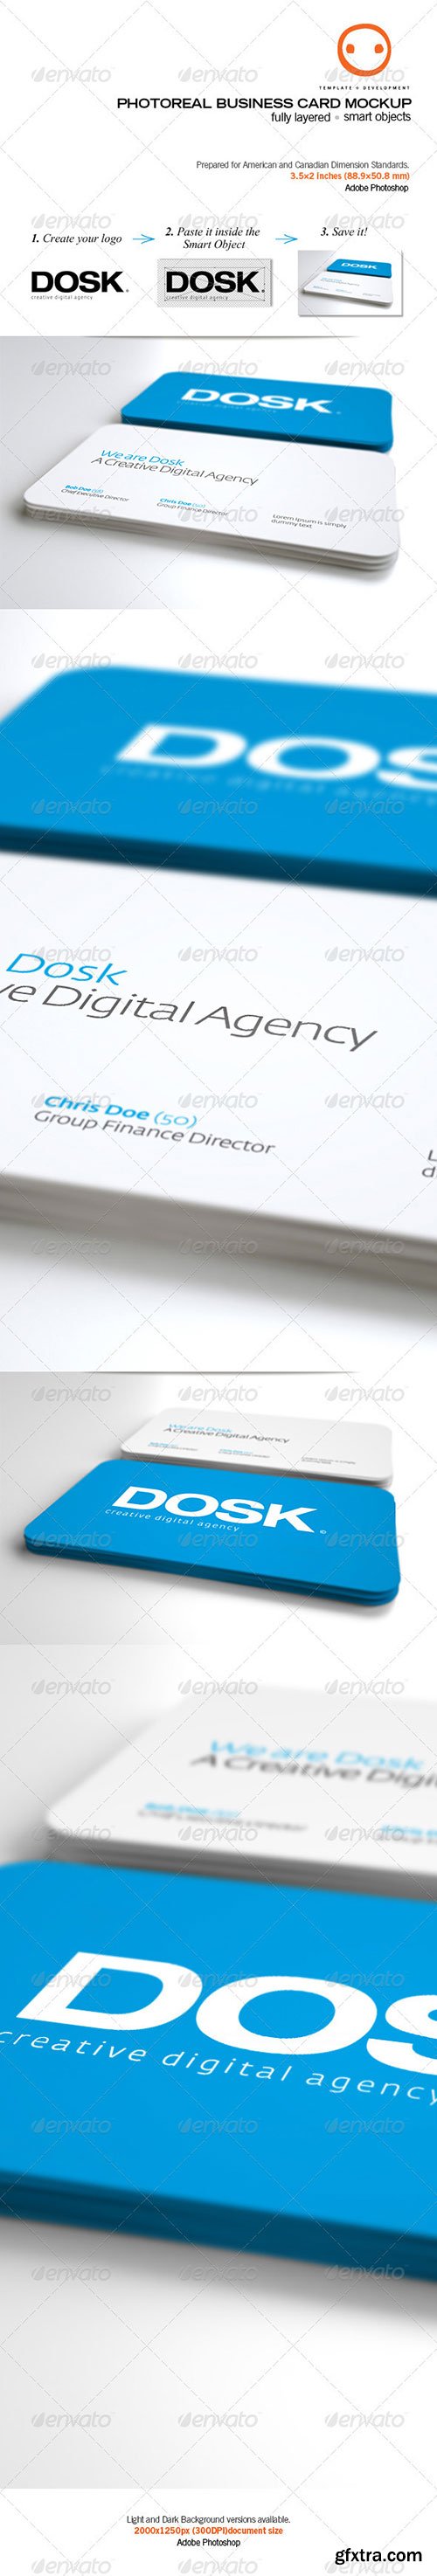 GraphicRiver - Photoreal Business Card Mockup 759489